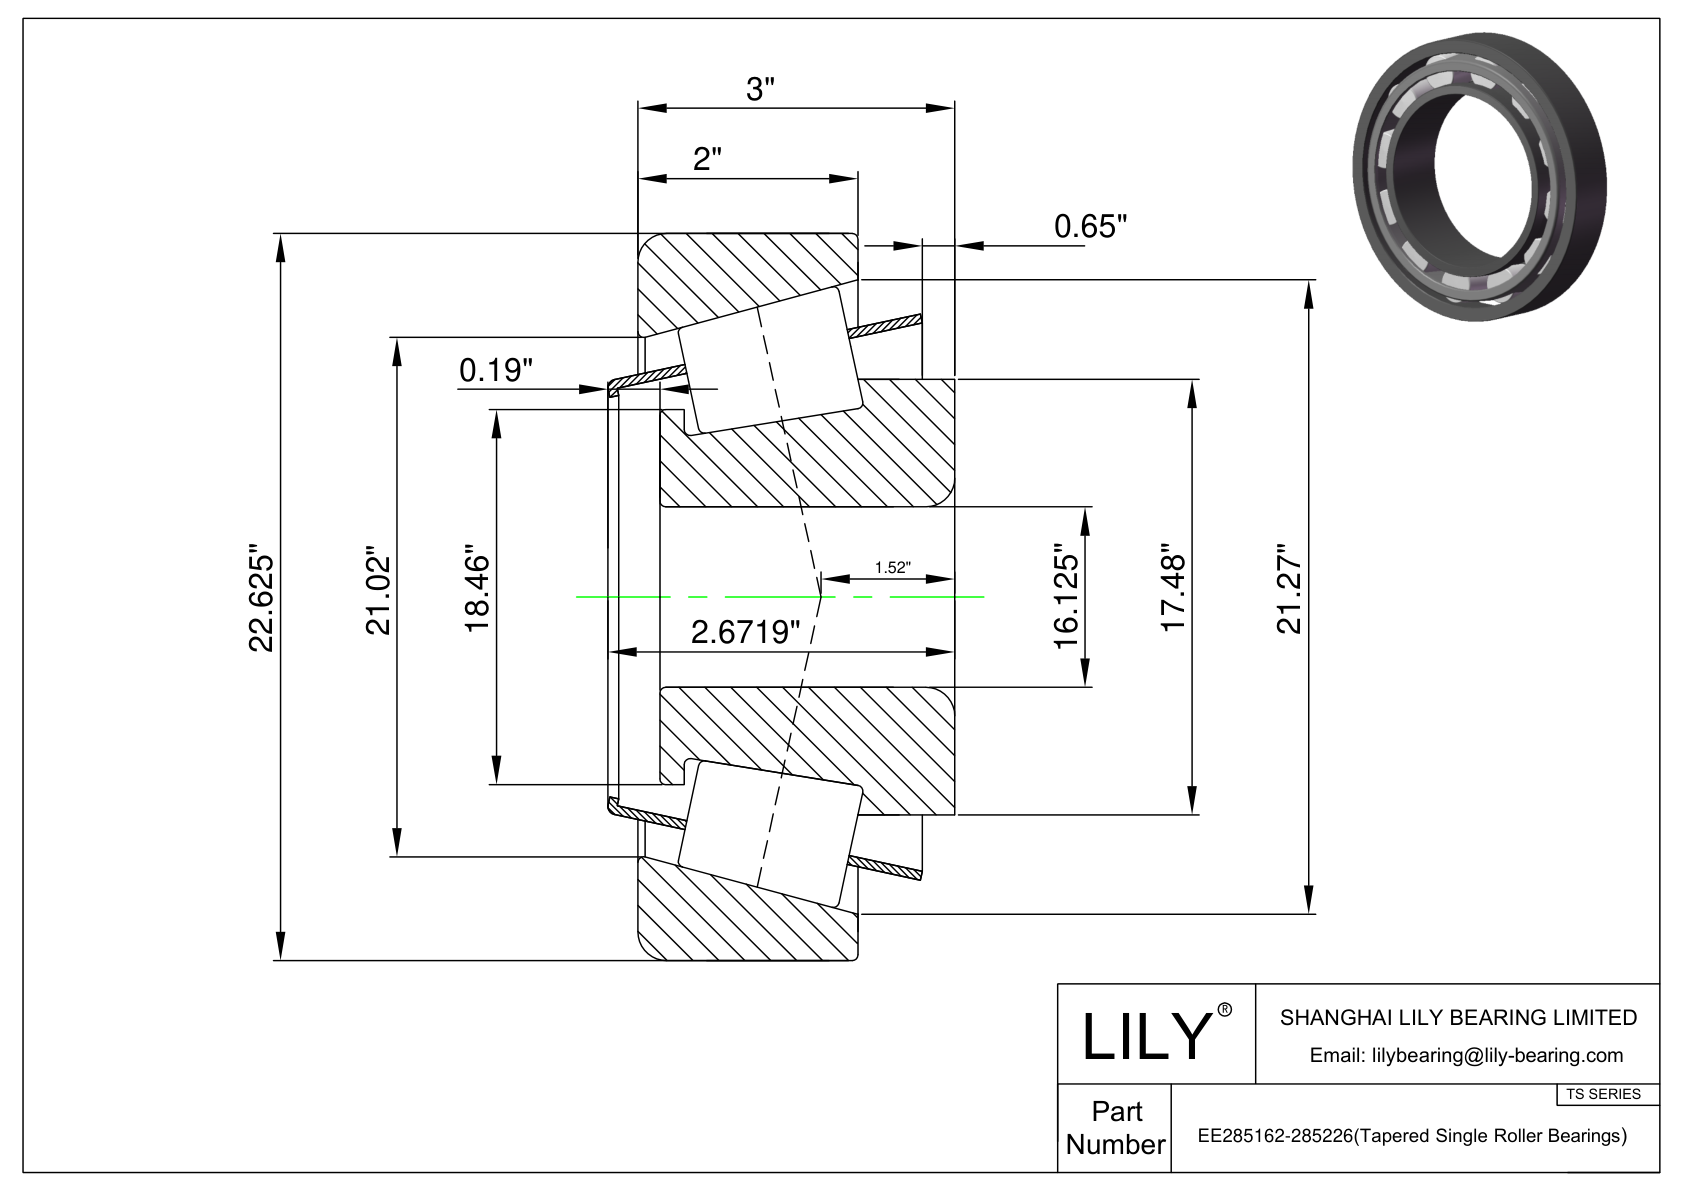 EE285162-285226 TS (Tapered Single Roller Bearings) (Imperial) cad drawing